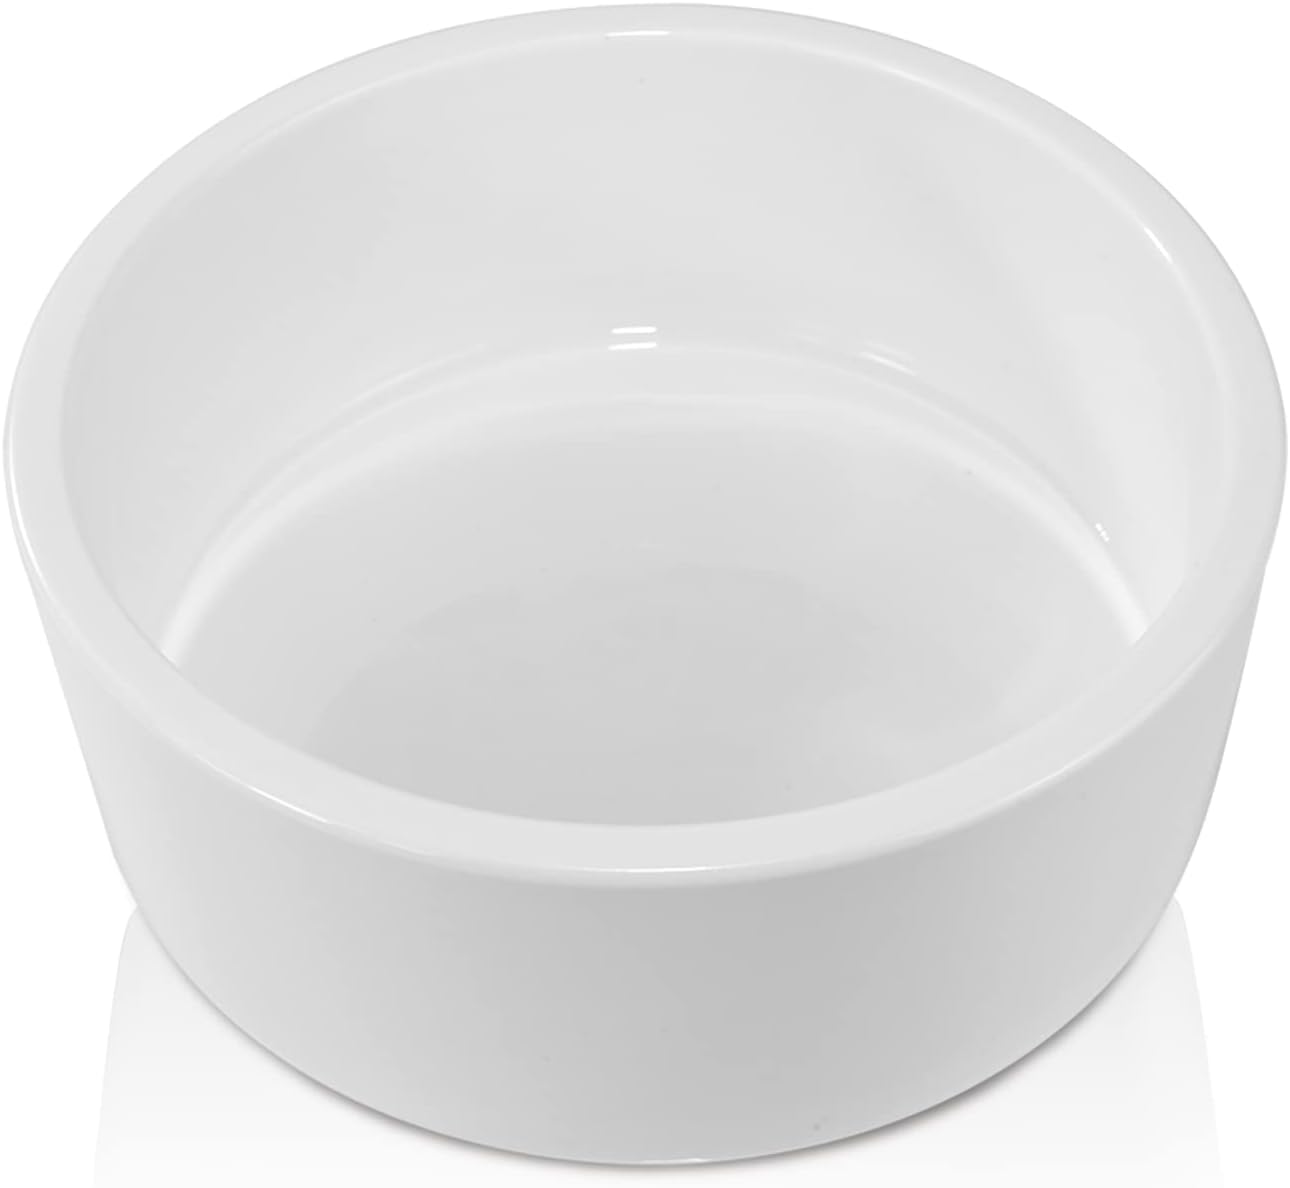 Small Sublimation Pet bowl 4.9 x 2.8 inches with AAA Coating -  | Reinforced Styrofoam Packaging"